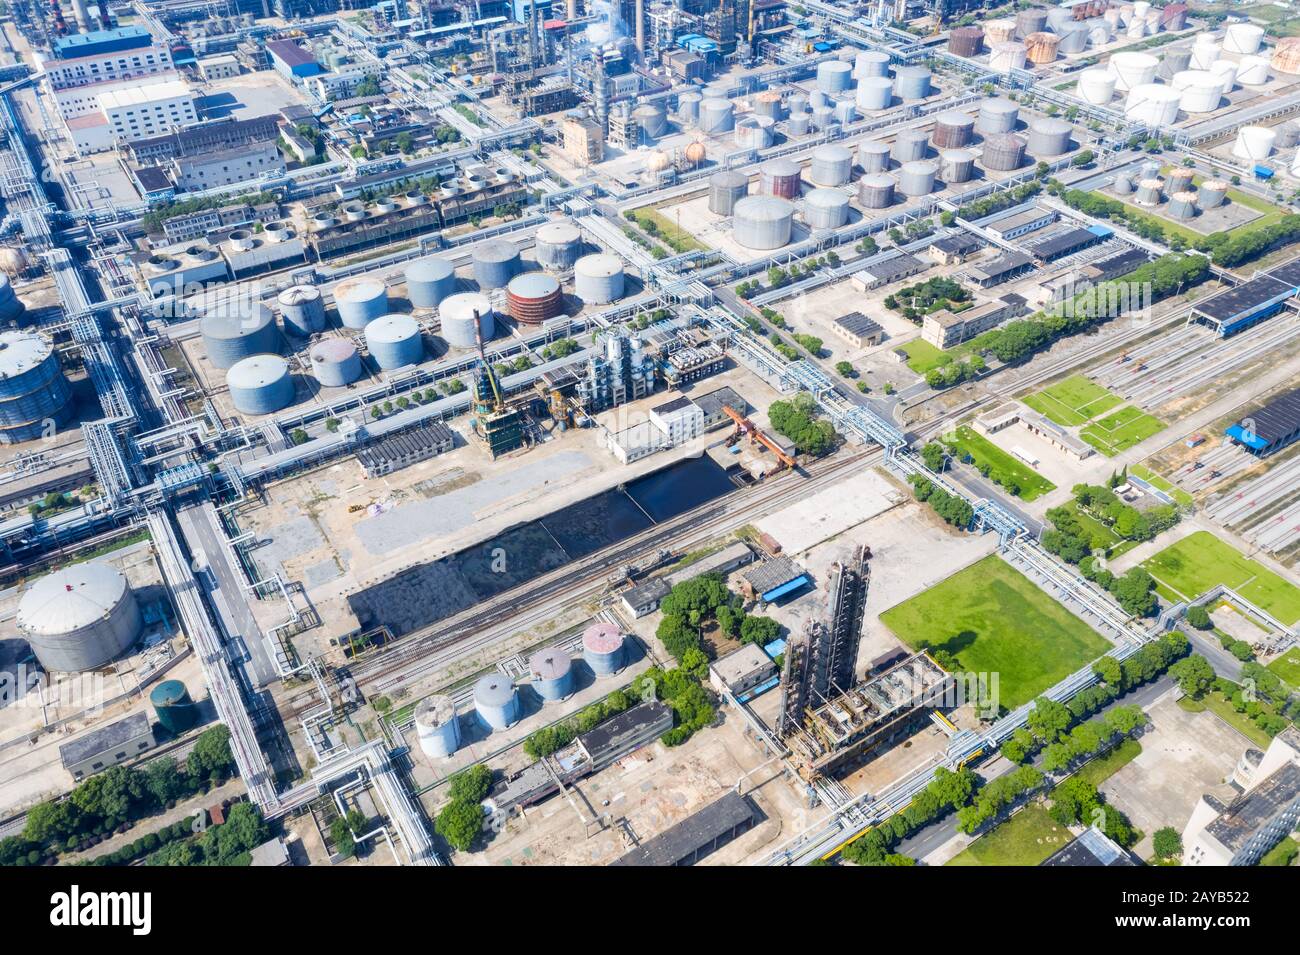 aerial view of petrochemical plant area Stock Photo